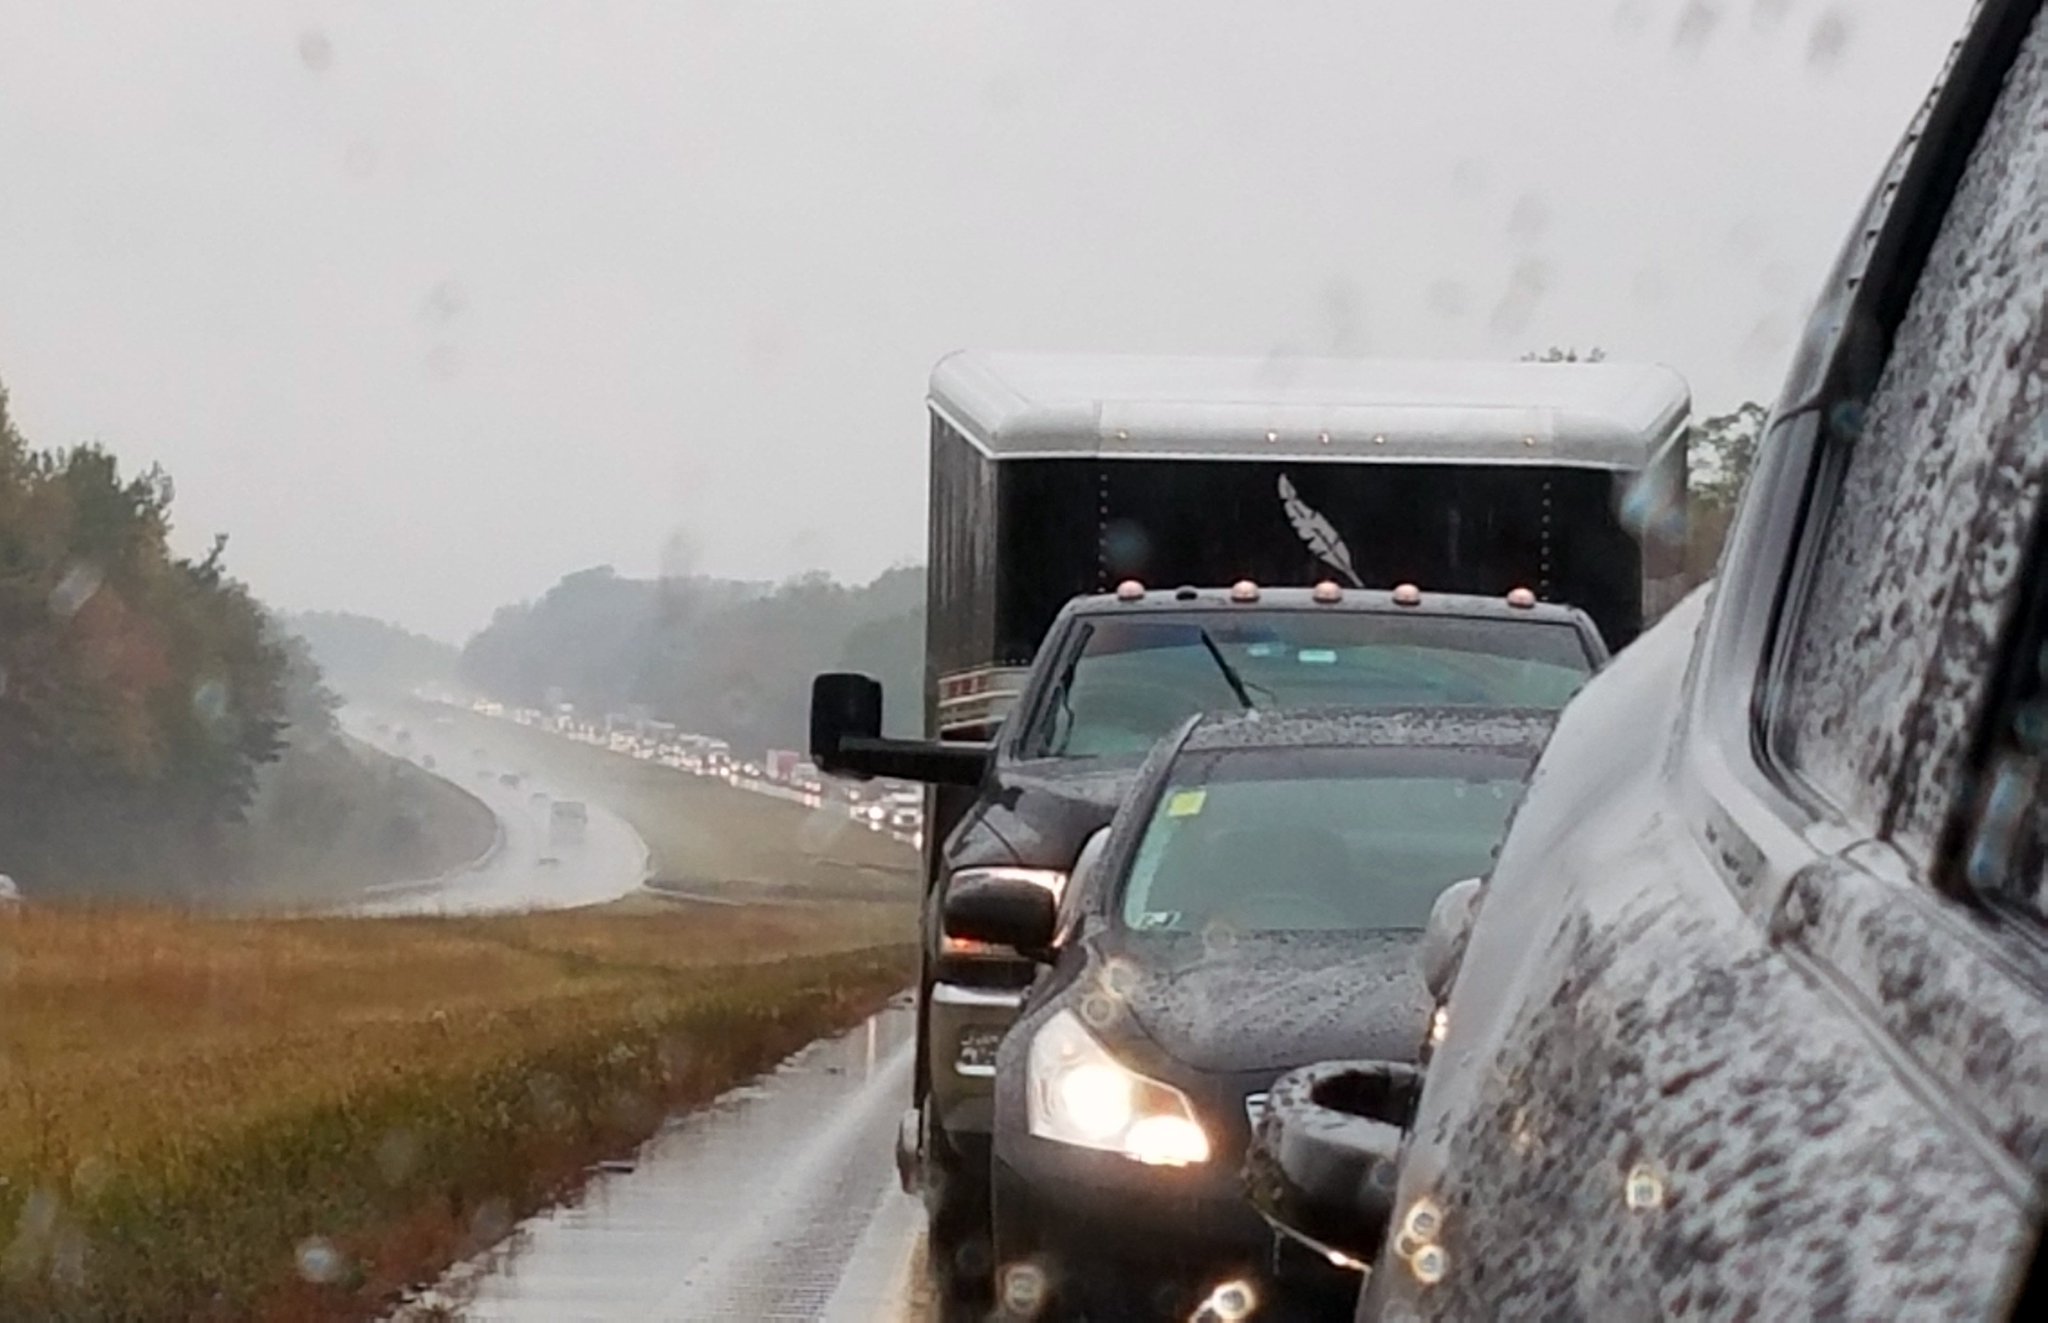 Traffic backed up on I-70 westbound outside of Zanesville near exit 160. A five-vehicle accident caused delays throughout the area between Zanesville and Cambridge. (Photo Credit: Brice Lillibridge). 